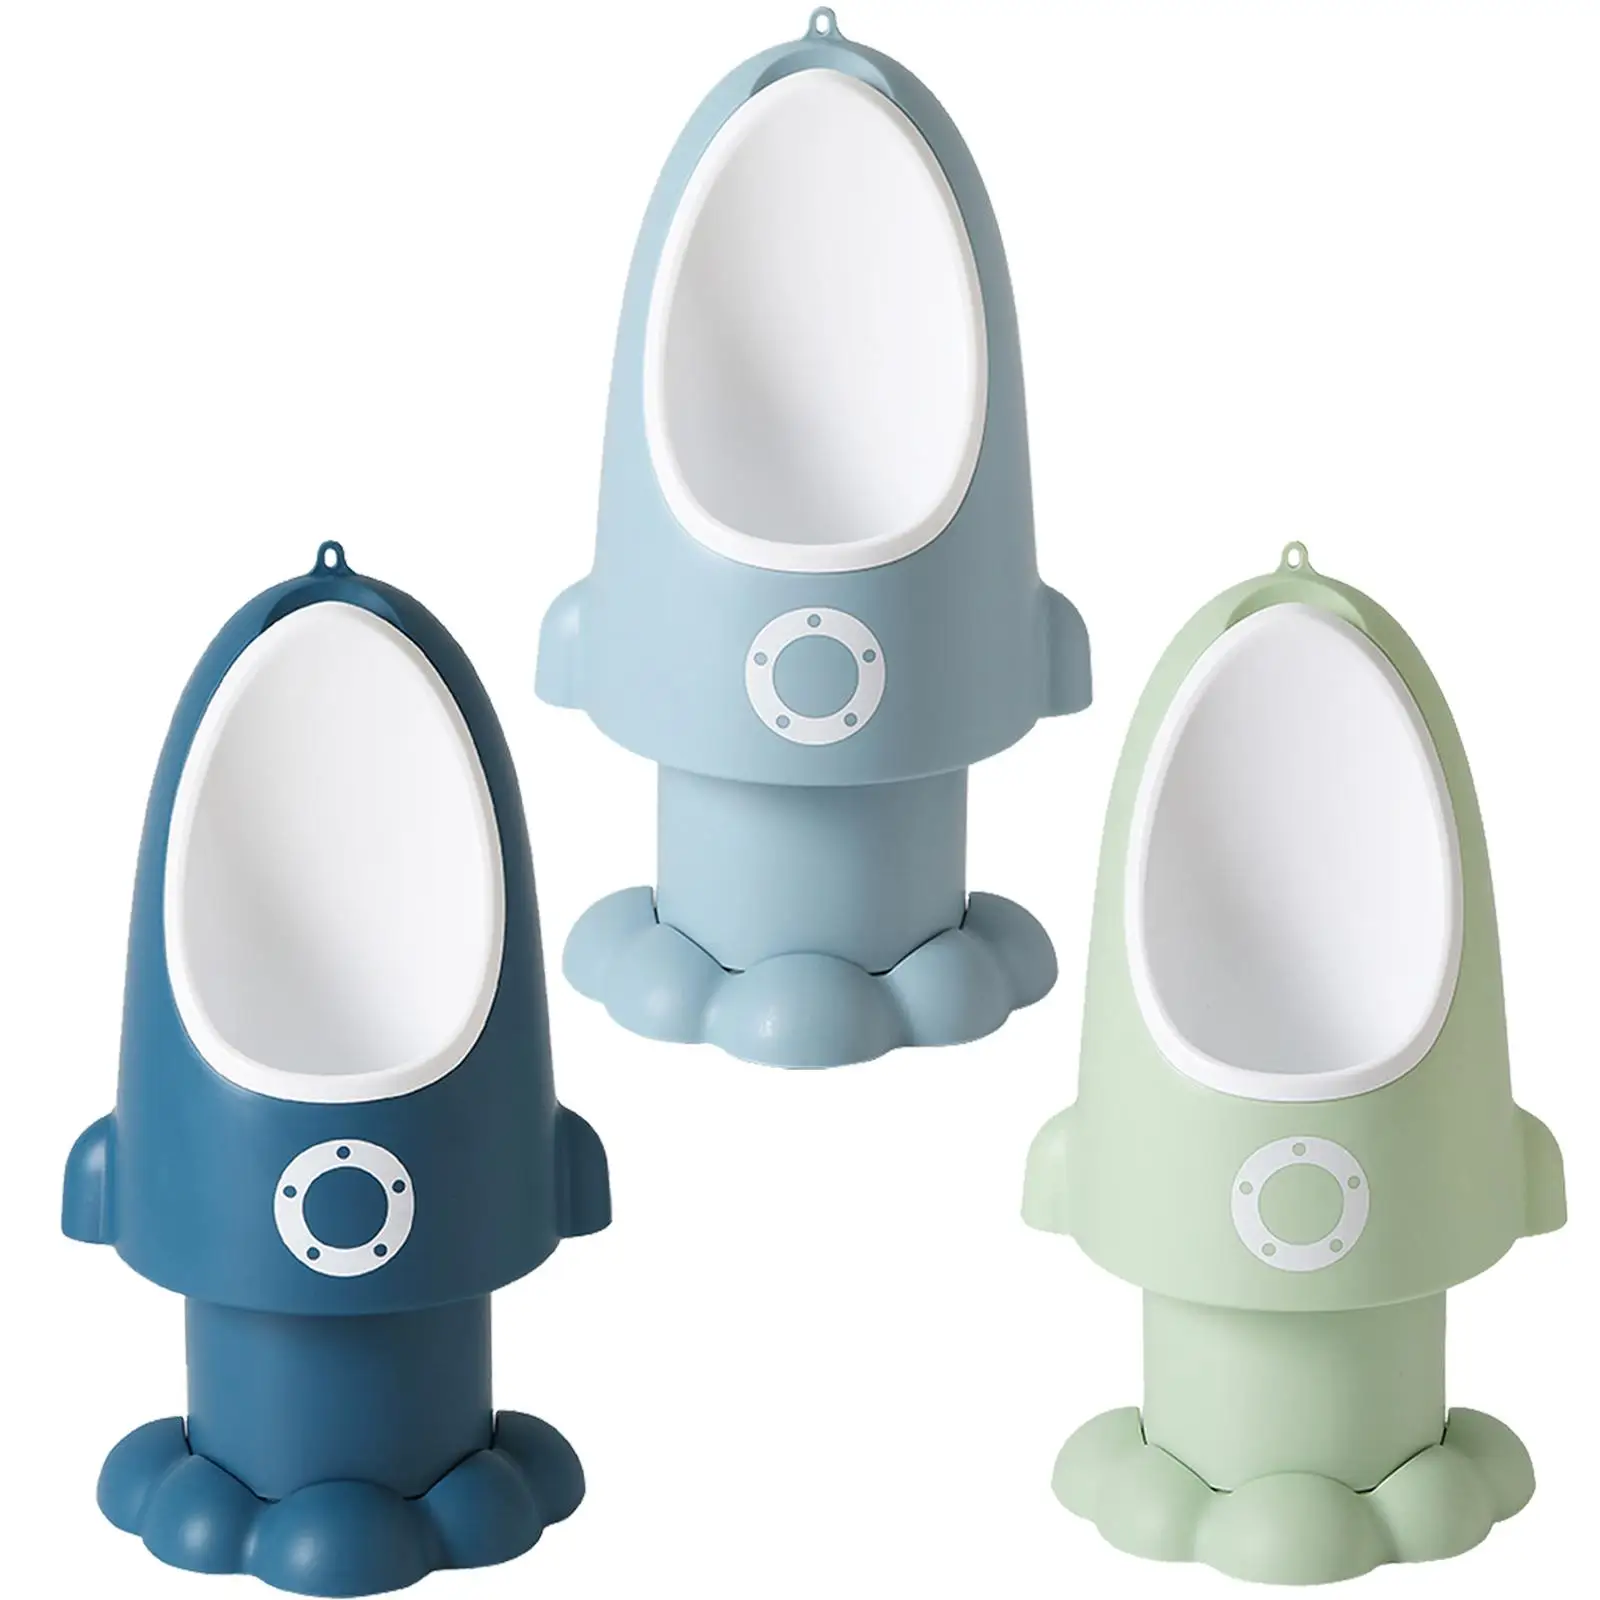 Rocket Shape Child Potty Urinal Toilet Pee Trainer Pee Training Urinal Trainer Adjustable Height for Kids Toddler Boys Baby